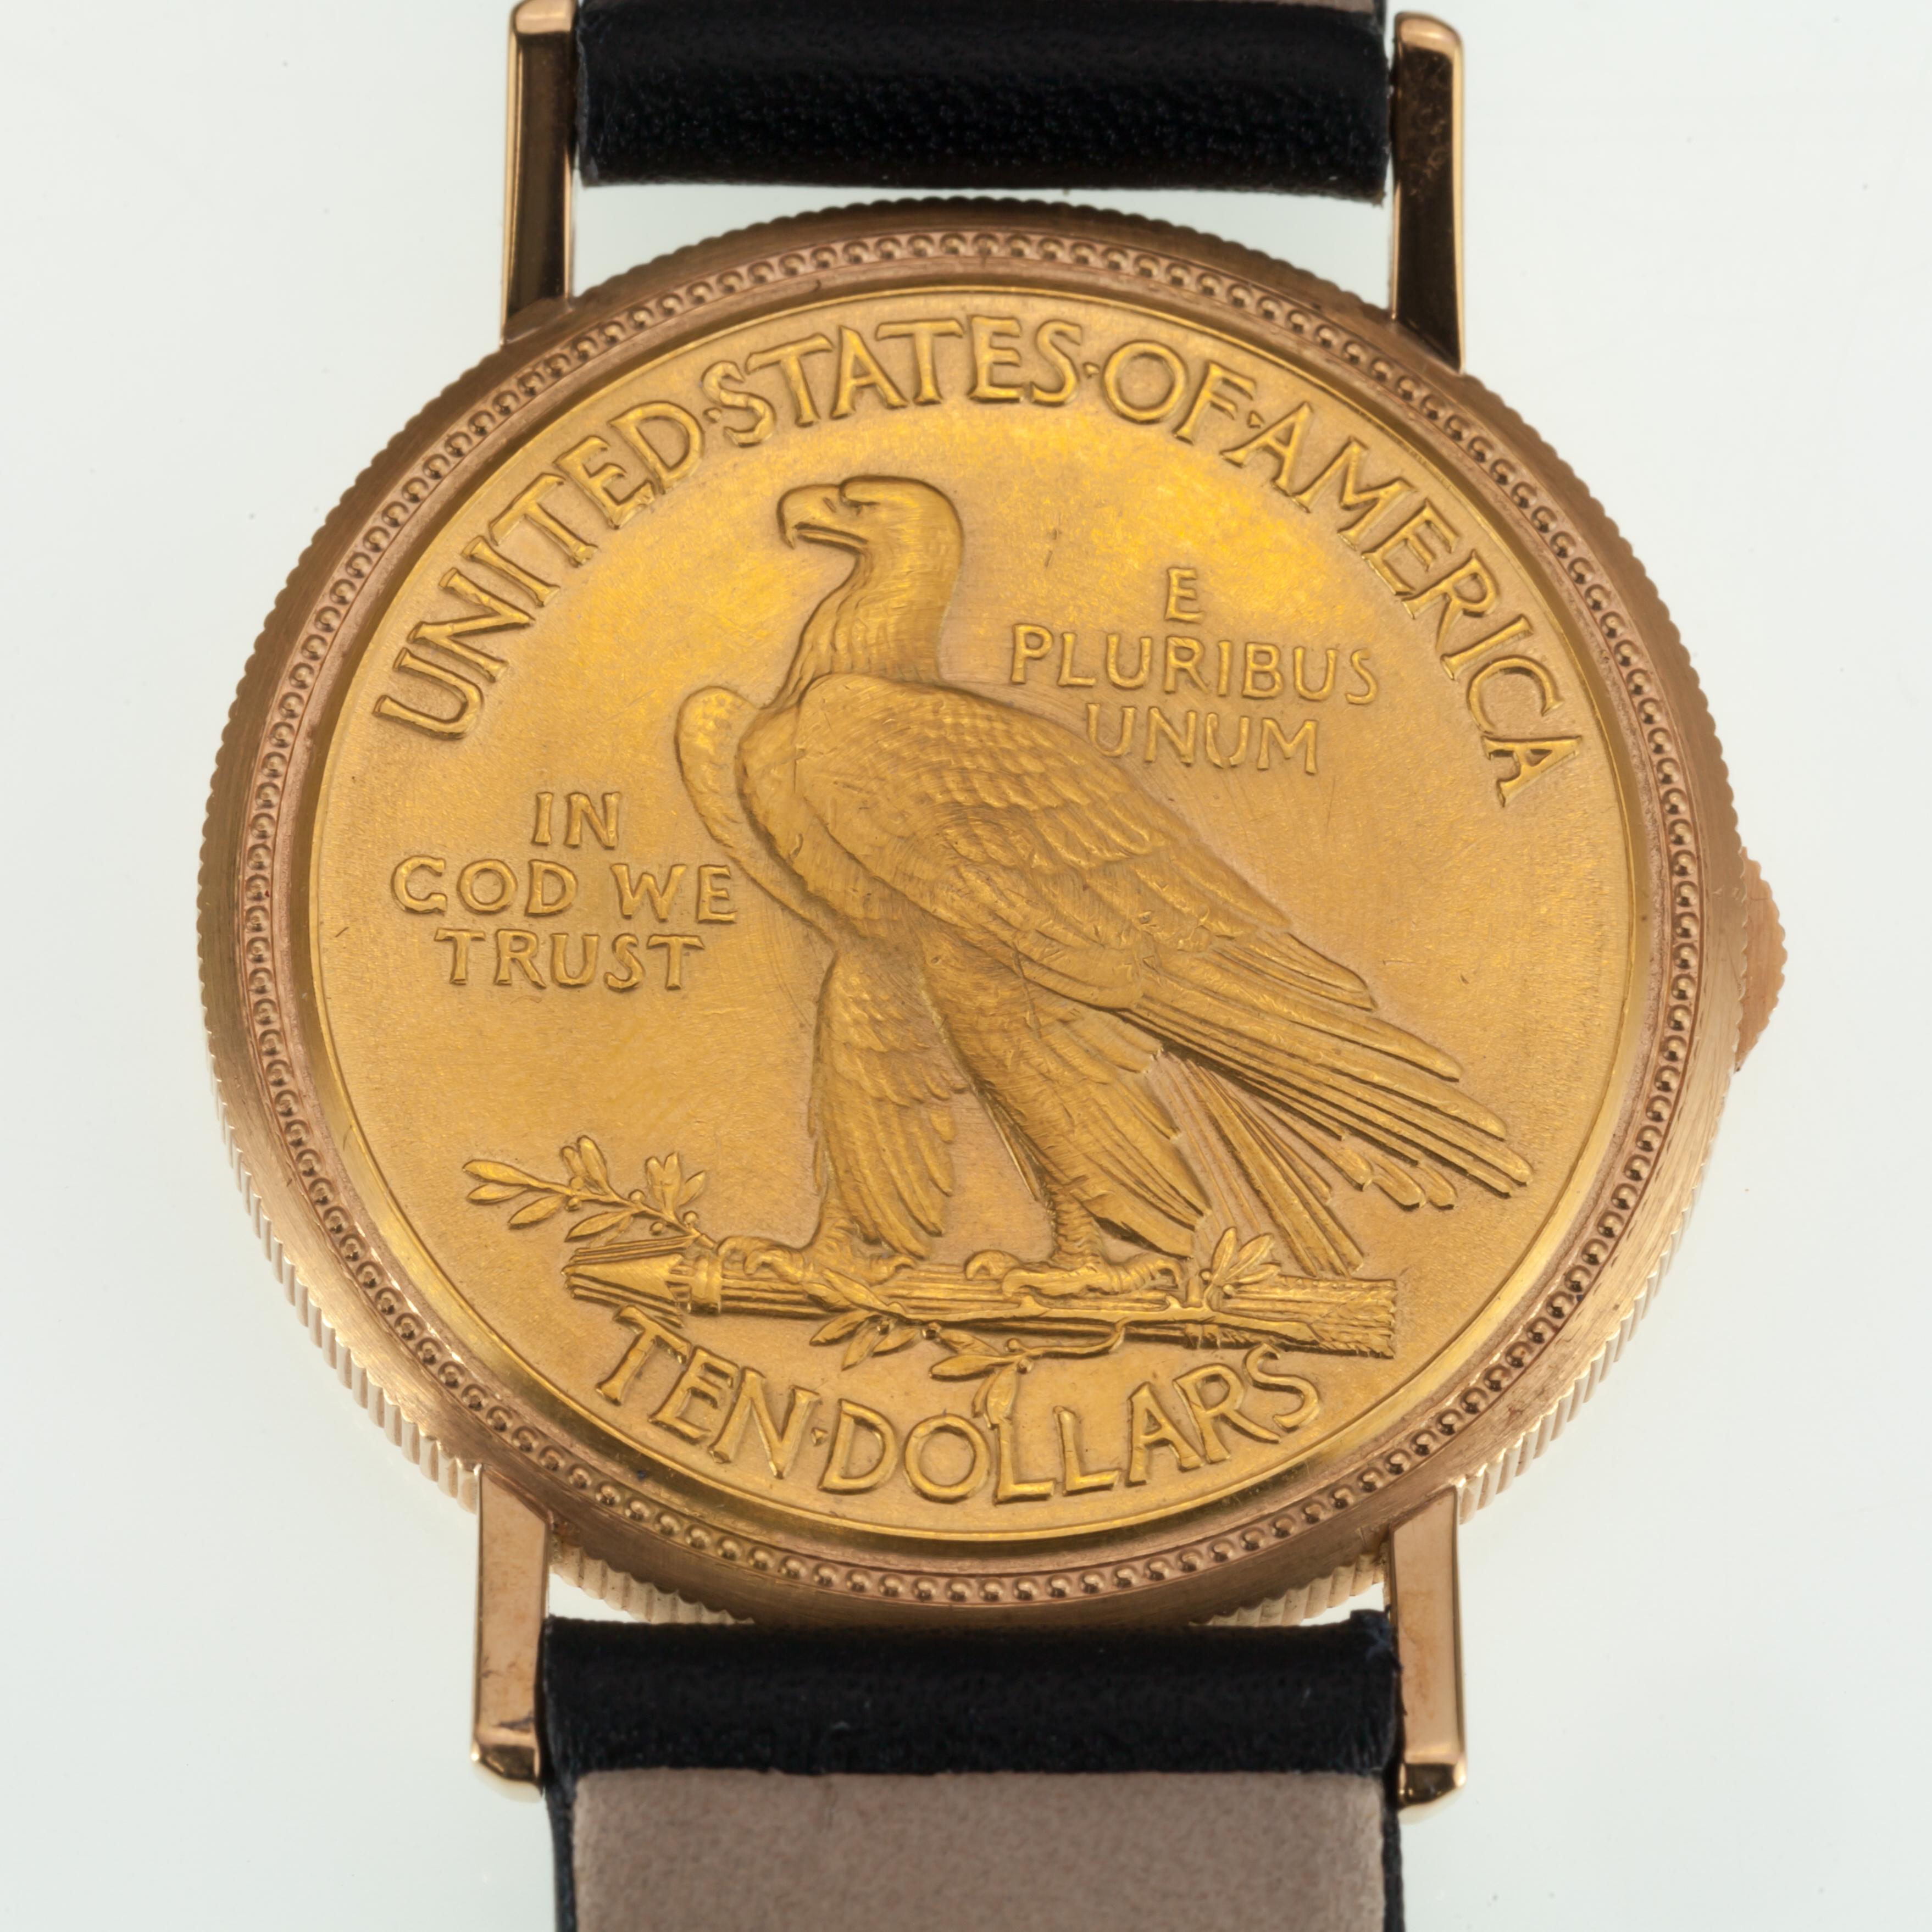 Vintage Leuba Louis 18k $10 Gold Indian Watch with Leather Band, Eagle Reverse 2